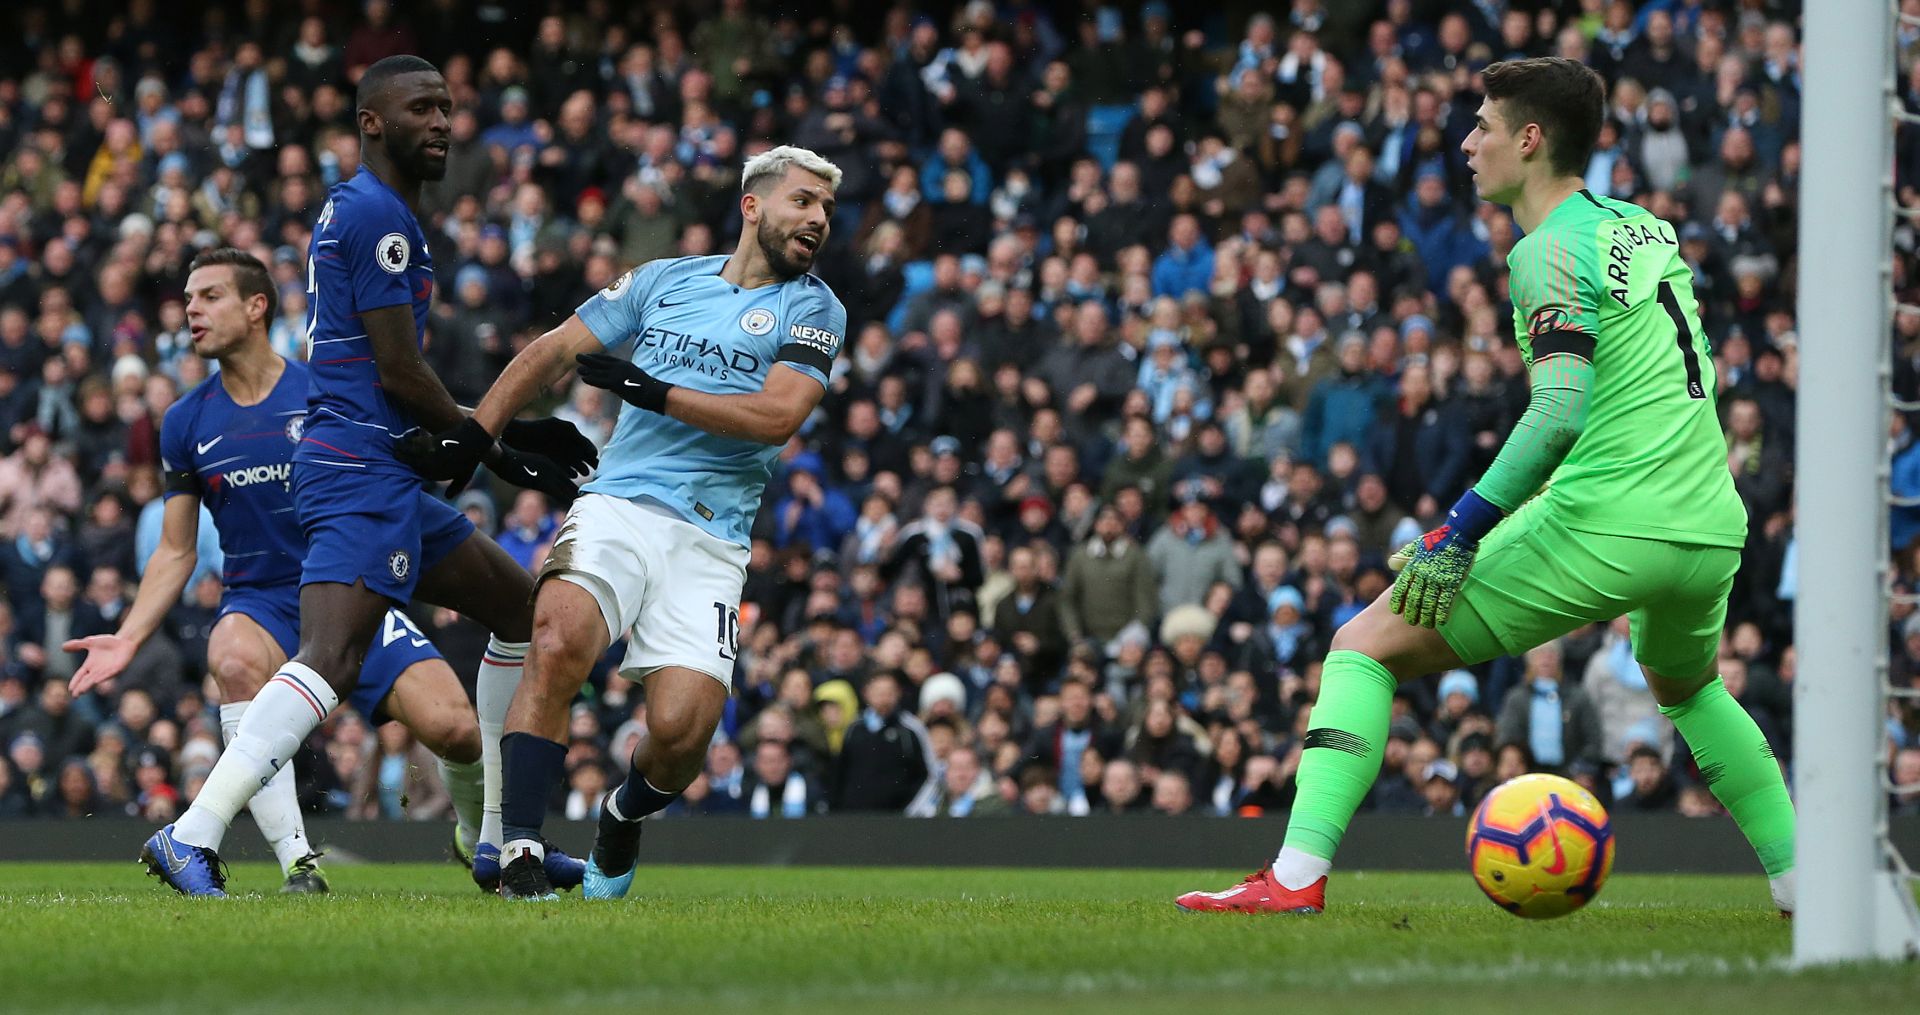 epa07359328 Manchester City's Sergio Aguero (3rdL) shoots to score his teams third goal during the English premier league soccer match between Manchester City and Chelsea at the Etihad Stadium in Manchester, Britain, 10 February 2019.  EPA/Nigel Roddis EDITORIAL USE ONLY. No use with unauthorized audio, video, data, fixture lists, club/league logos or 'live' services. Online in-match use limited to 120 images, no video emulation. No use in betting, games or single club/league/player publications.